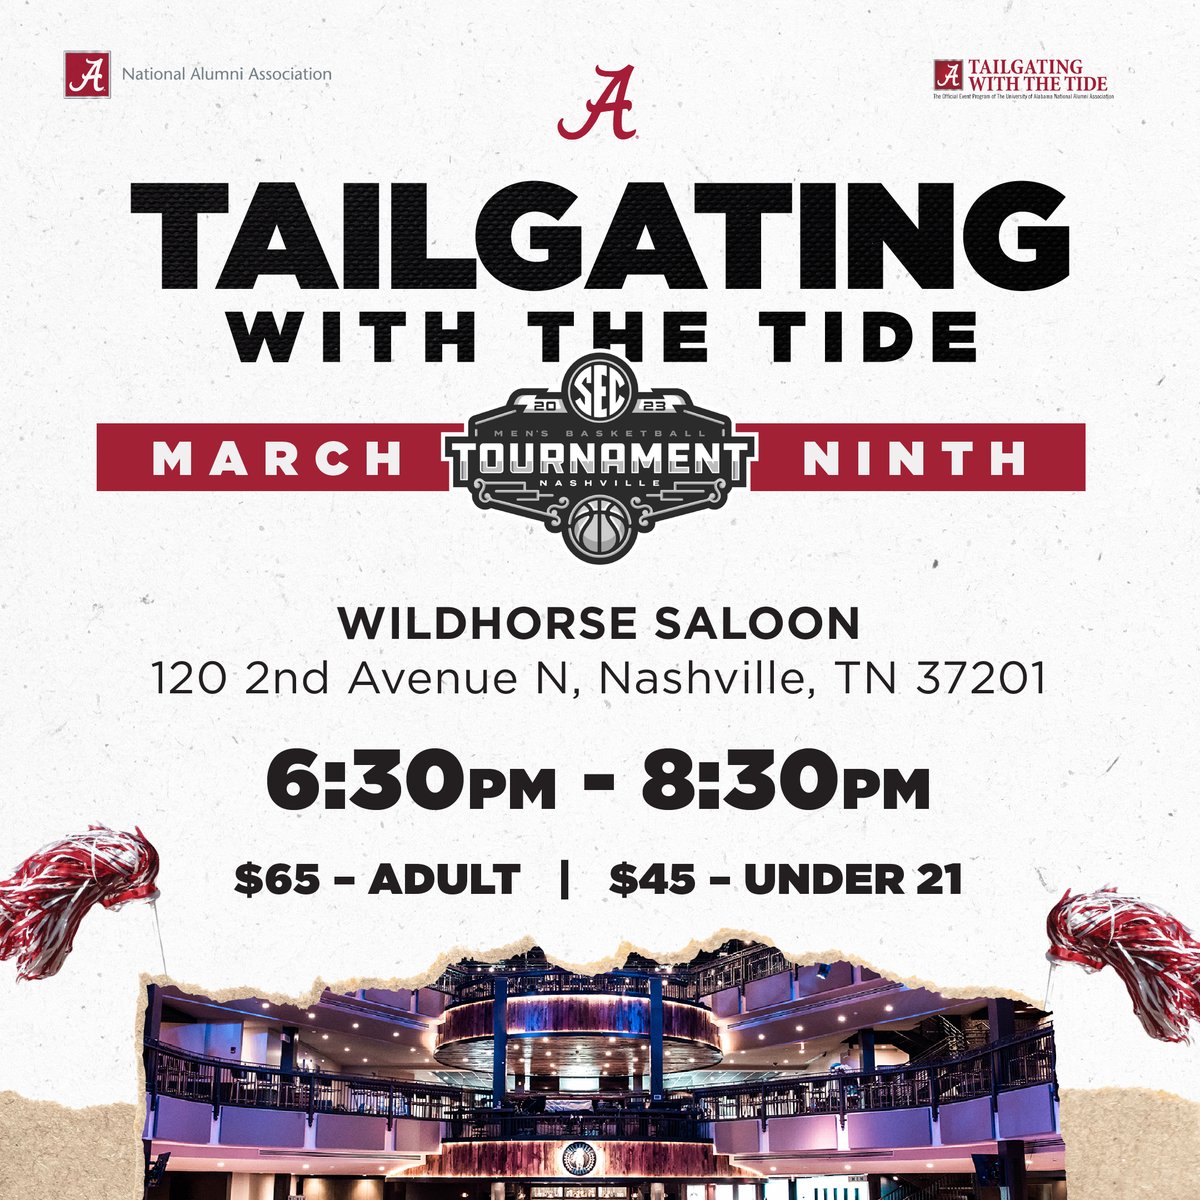 Join us in Nashville for the SEC tournament on 3/9! We'll have two buffets with barbecue nachos and wings, along with TVs to watch the other games. Click the link below to purchase tickets + use the code YASEC23 for 15% off. We'll see you there! 🤠🏀

eventbrite.com/e/tailgating-w…